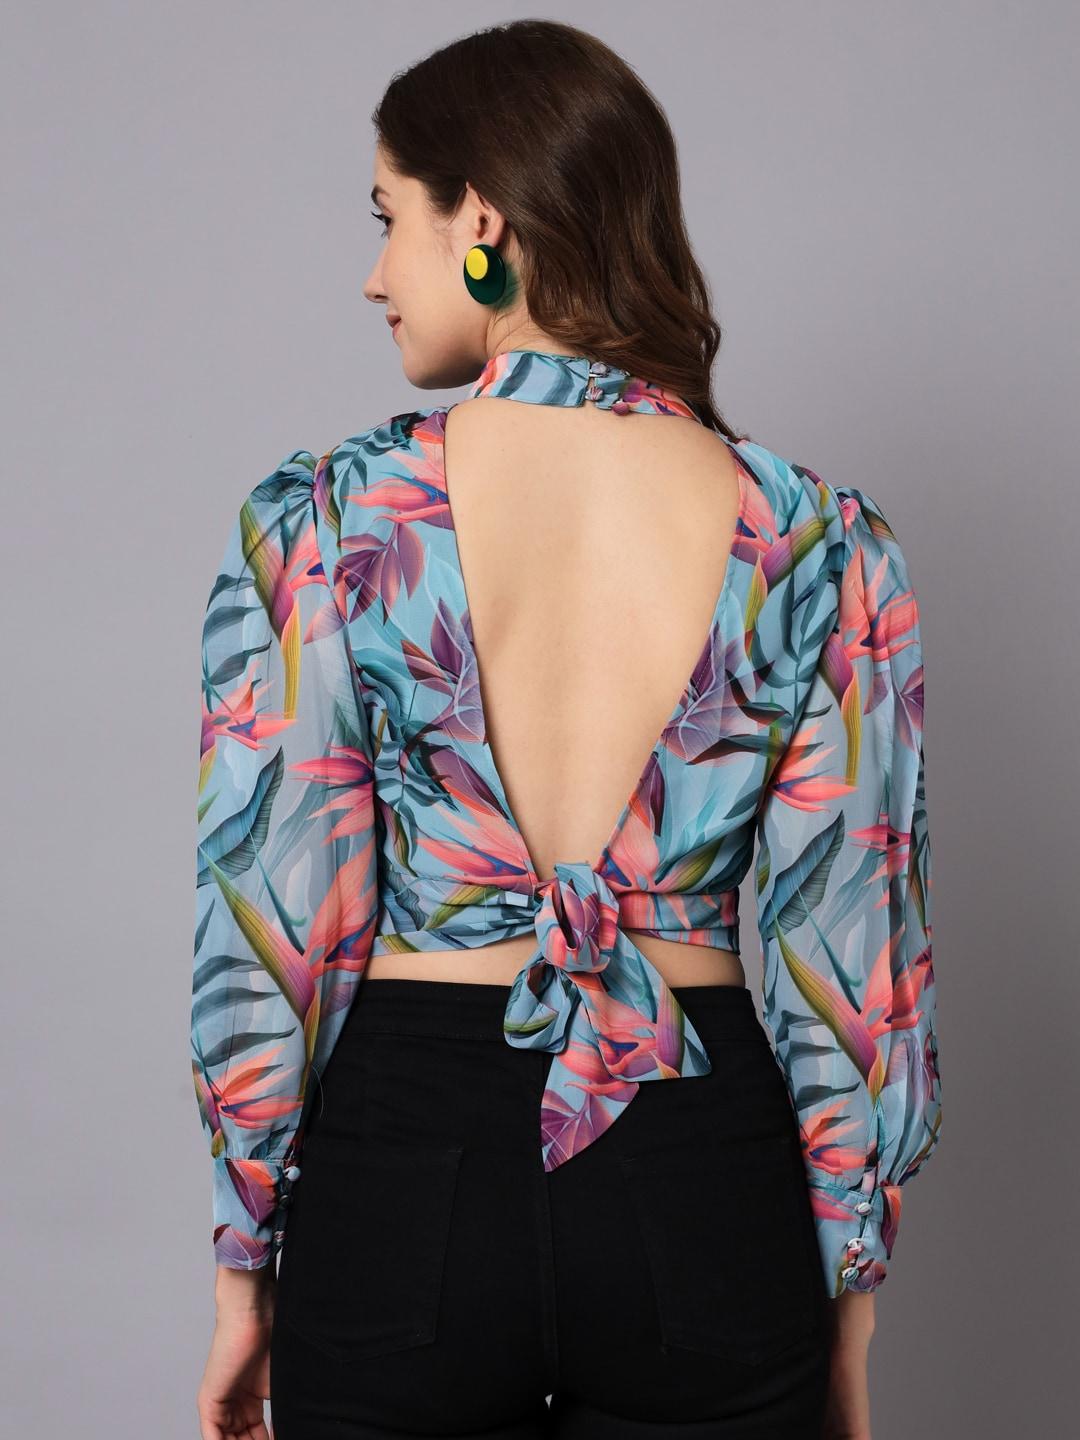 the-dry-state-floral-printed-tie-up-styled-back-crop-top